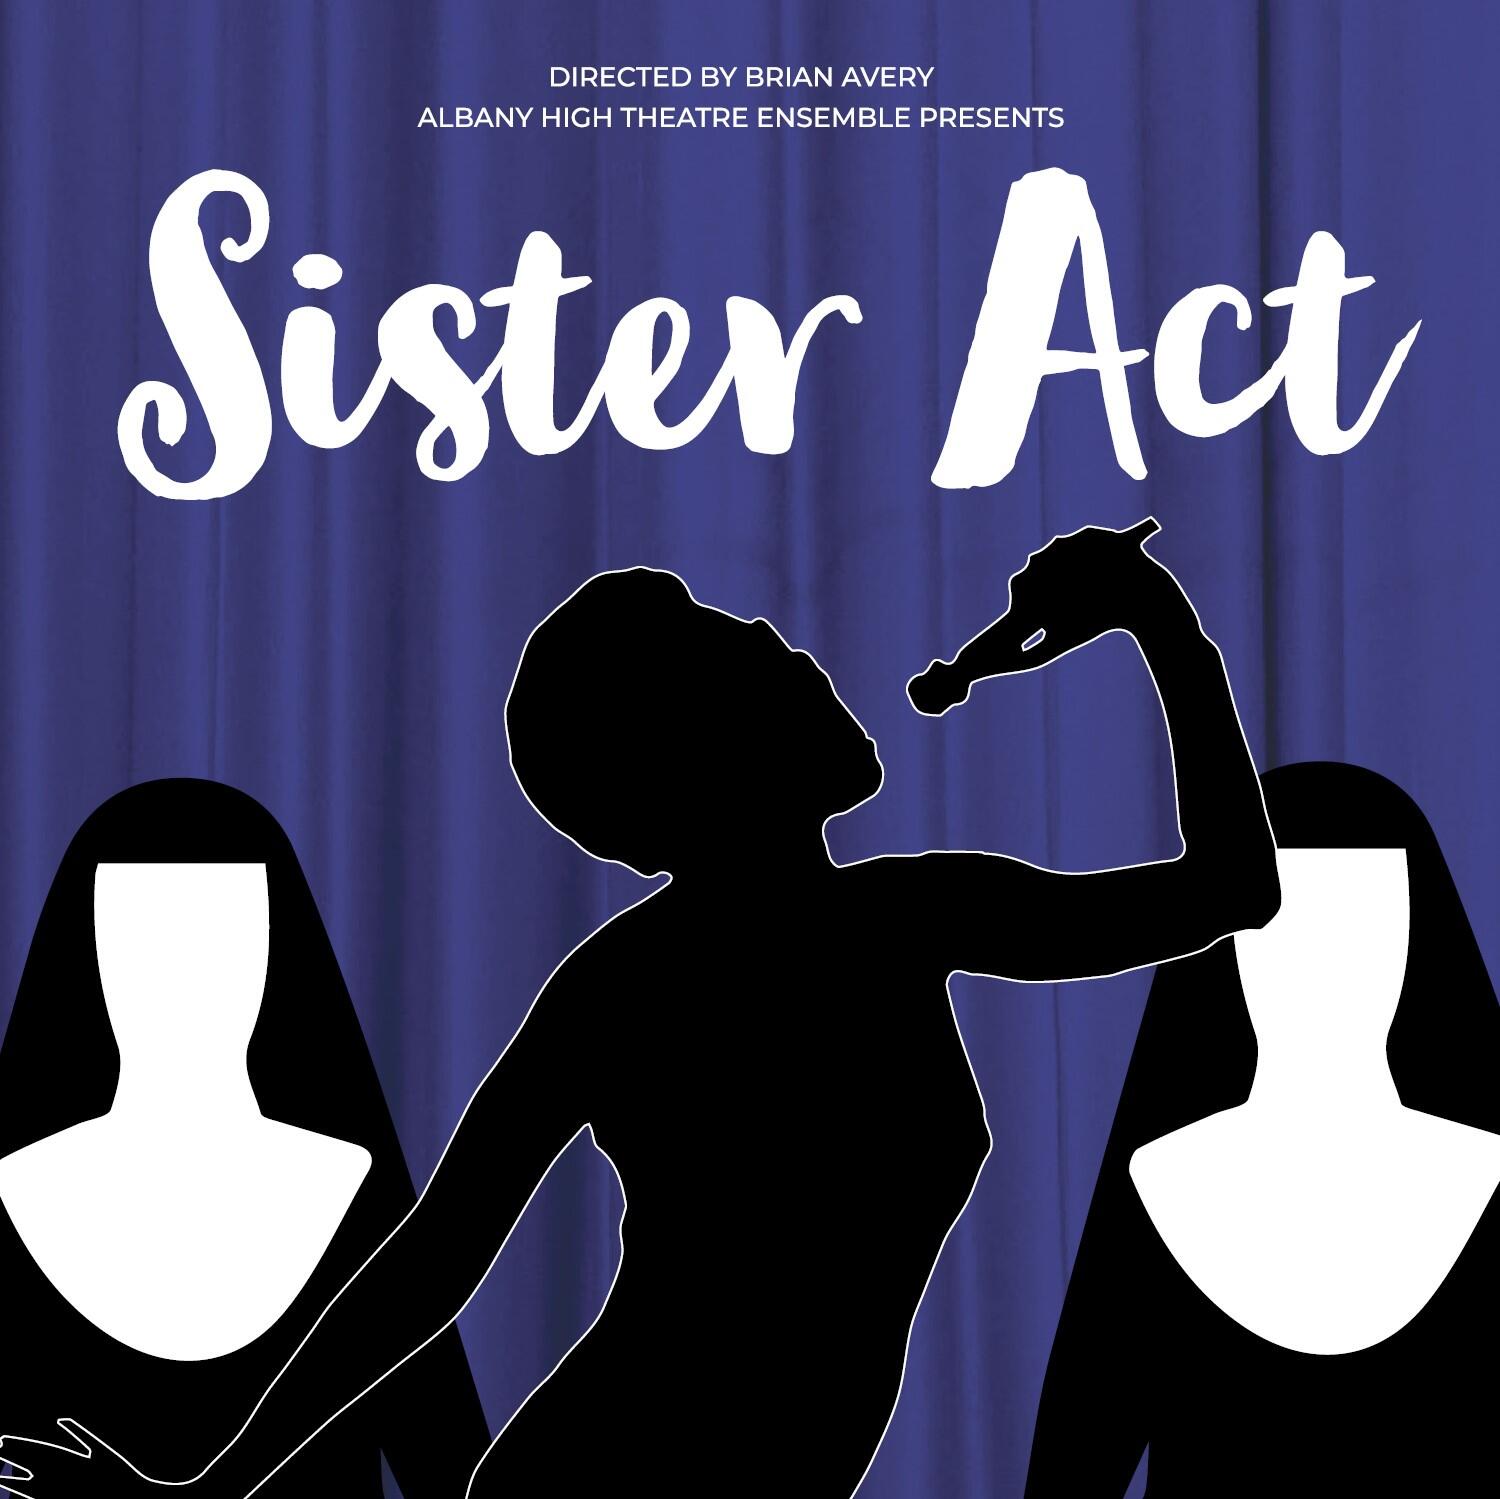 Text that reads "Sister Act"